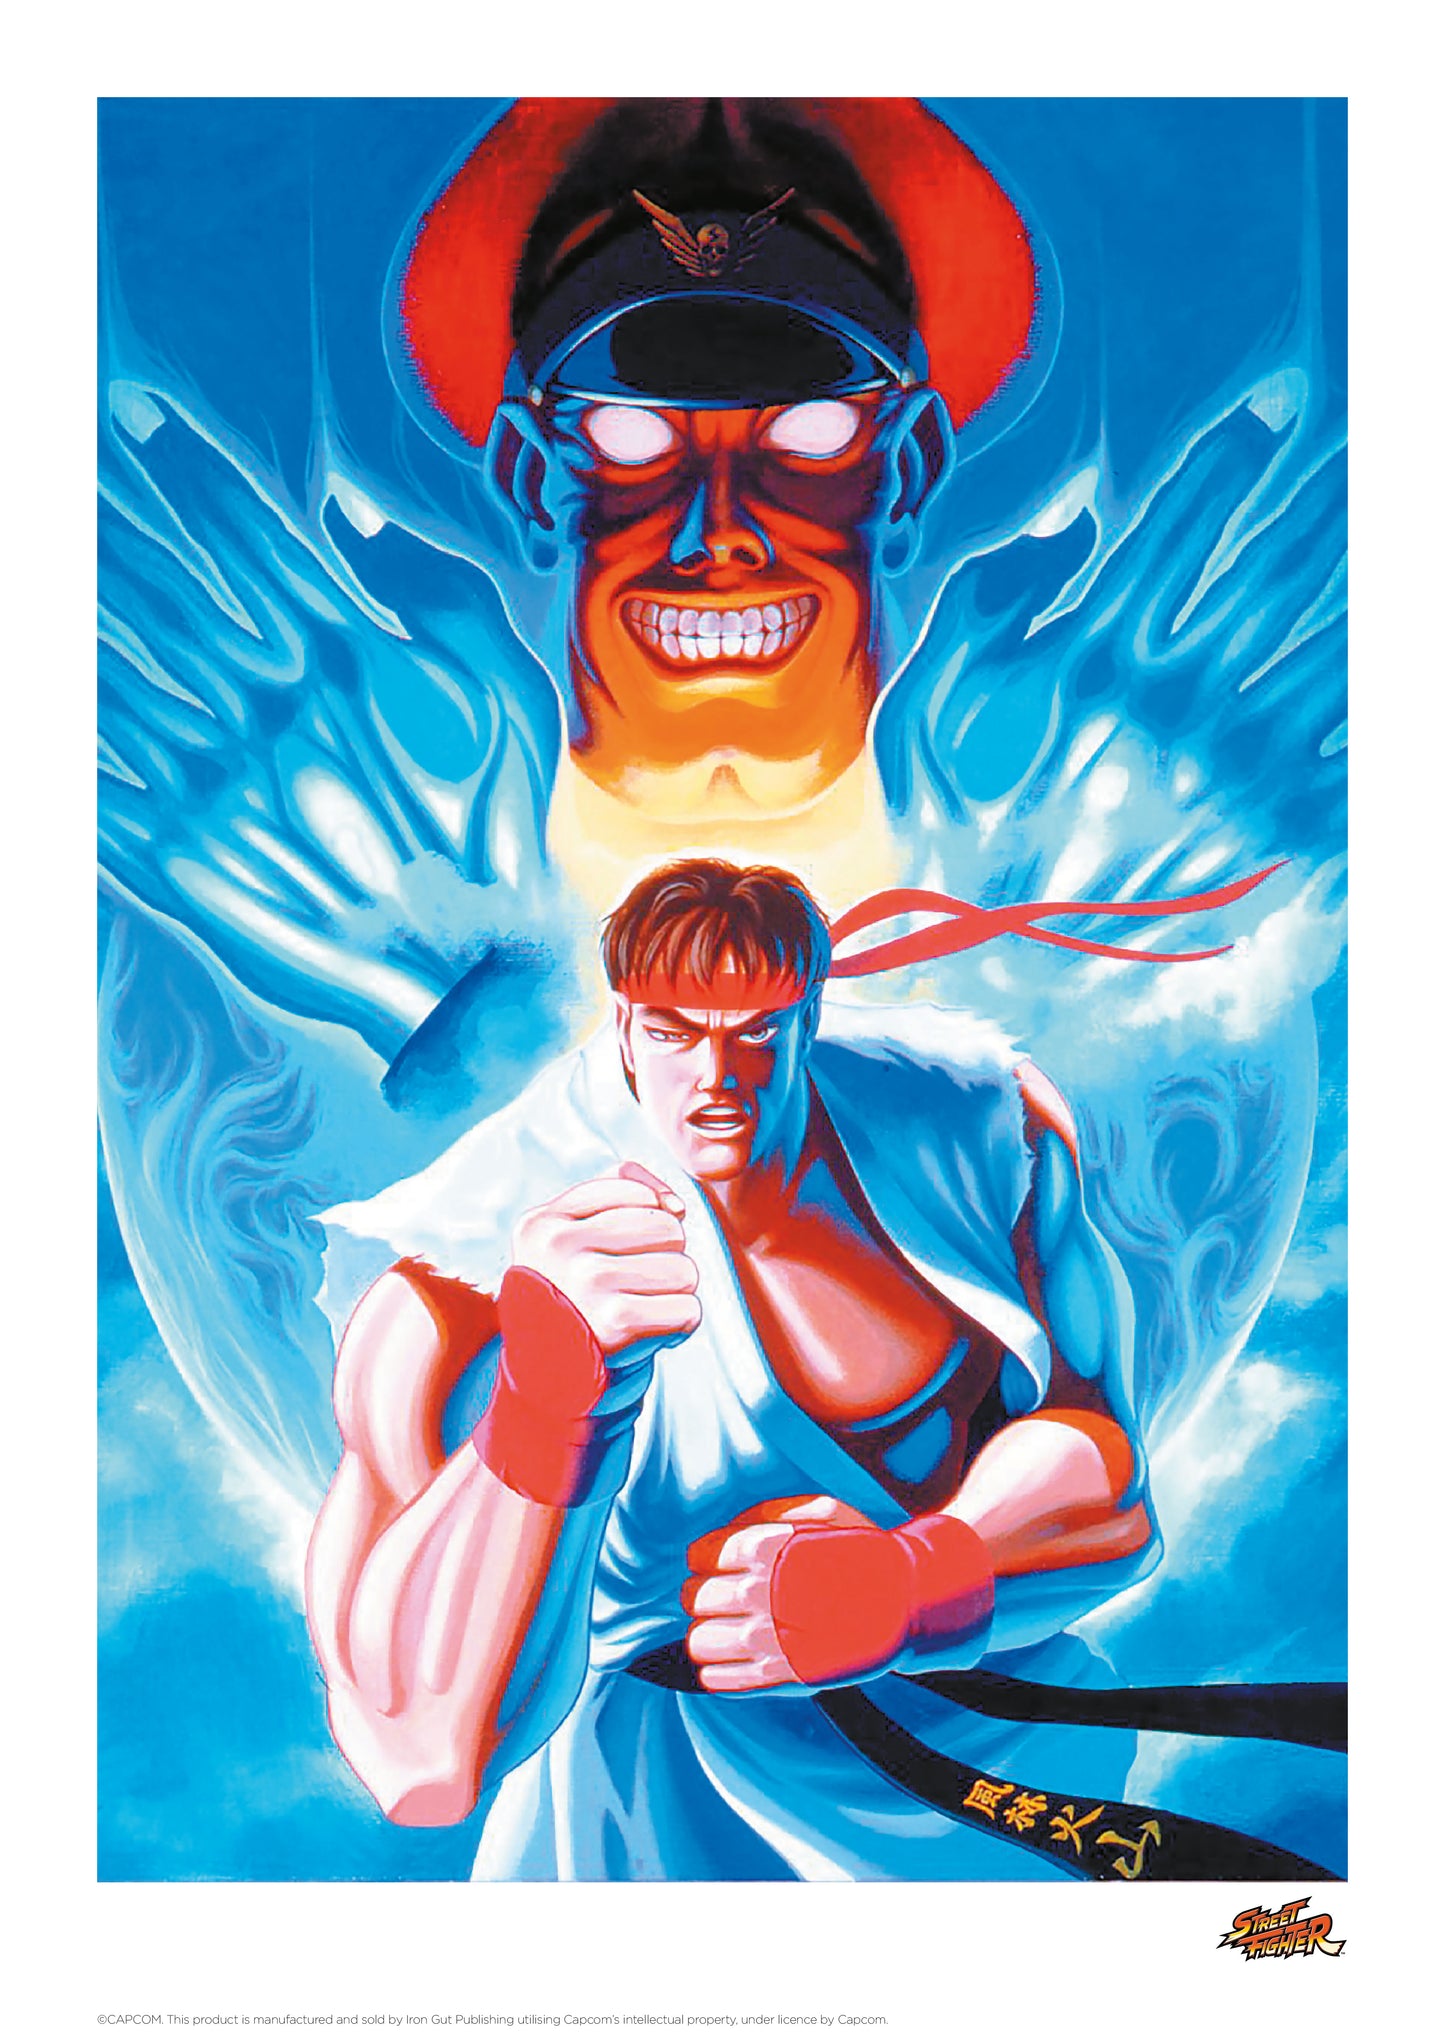 Street Fighter Limited Edition Art Print